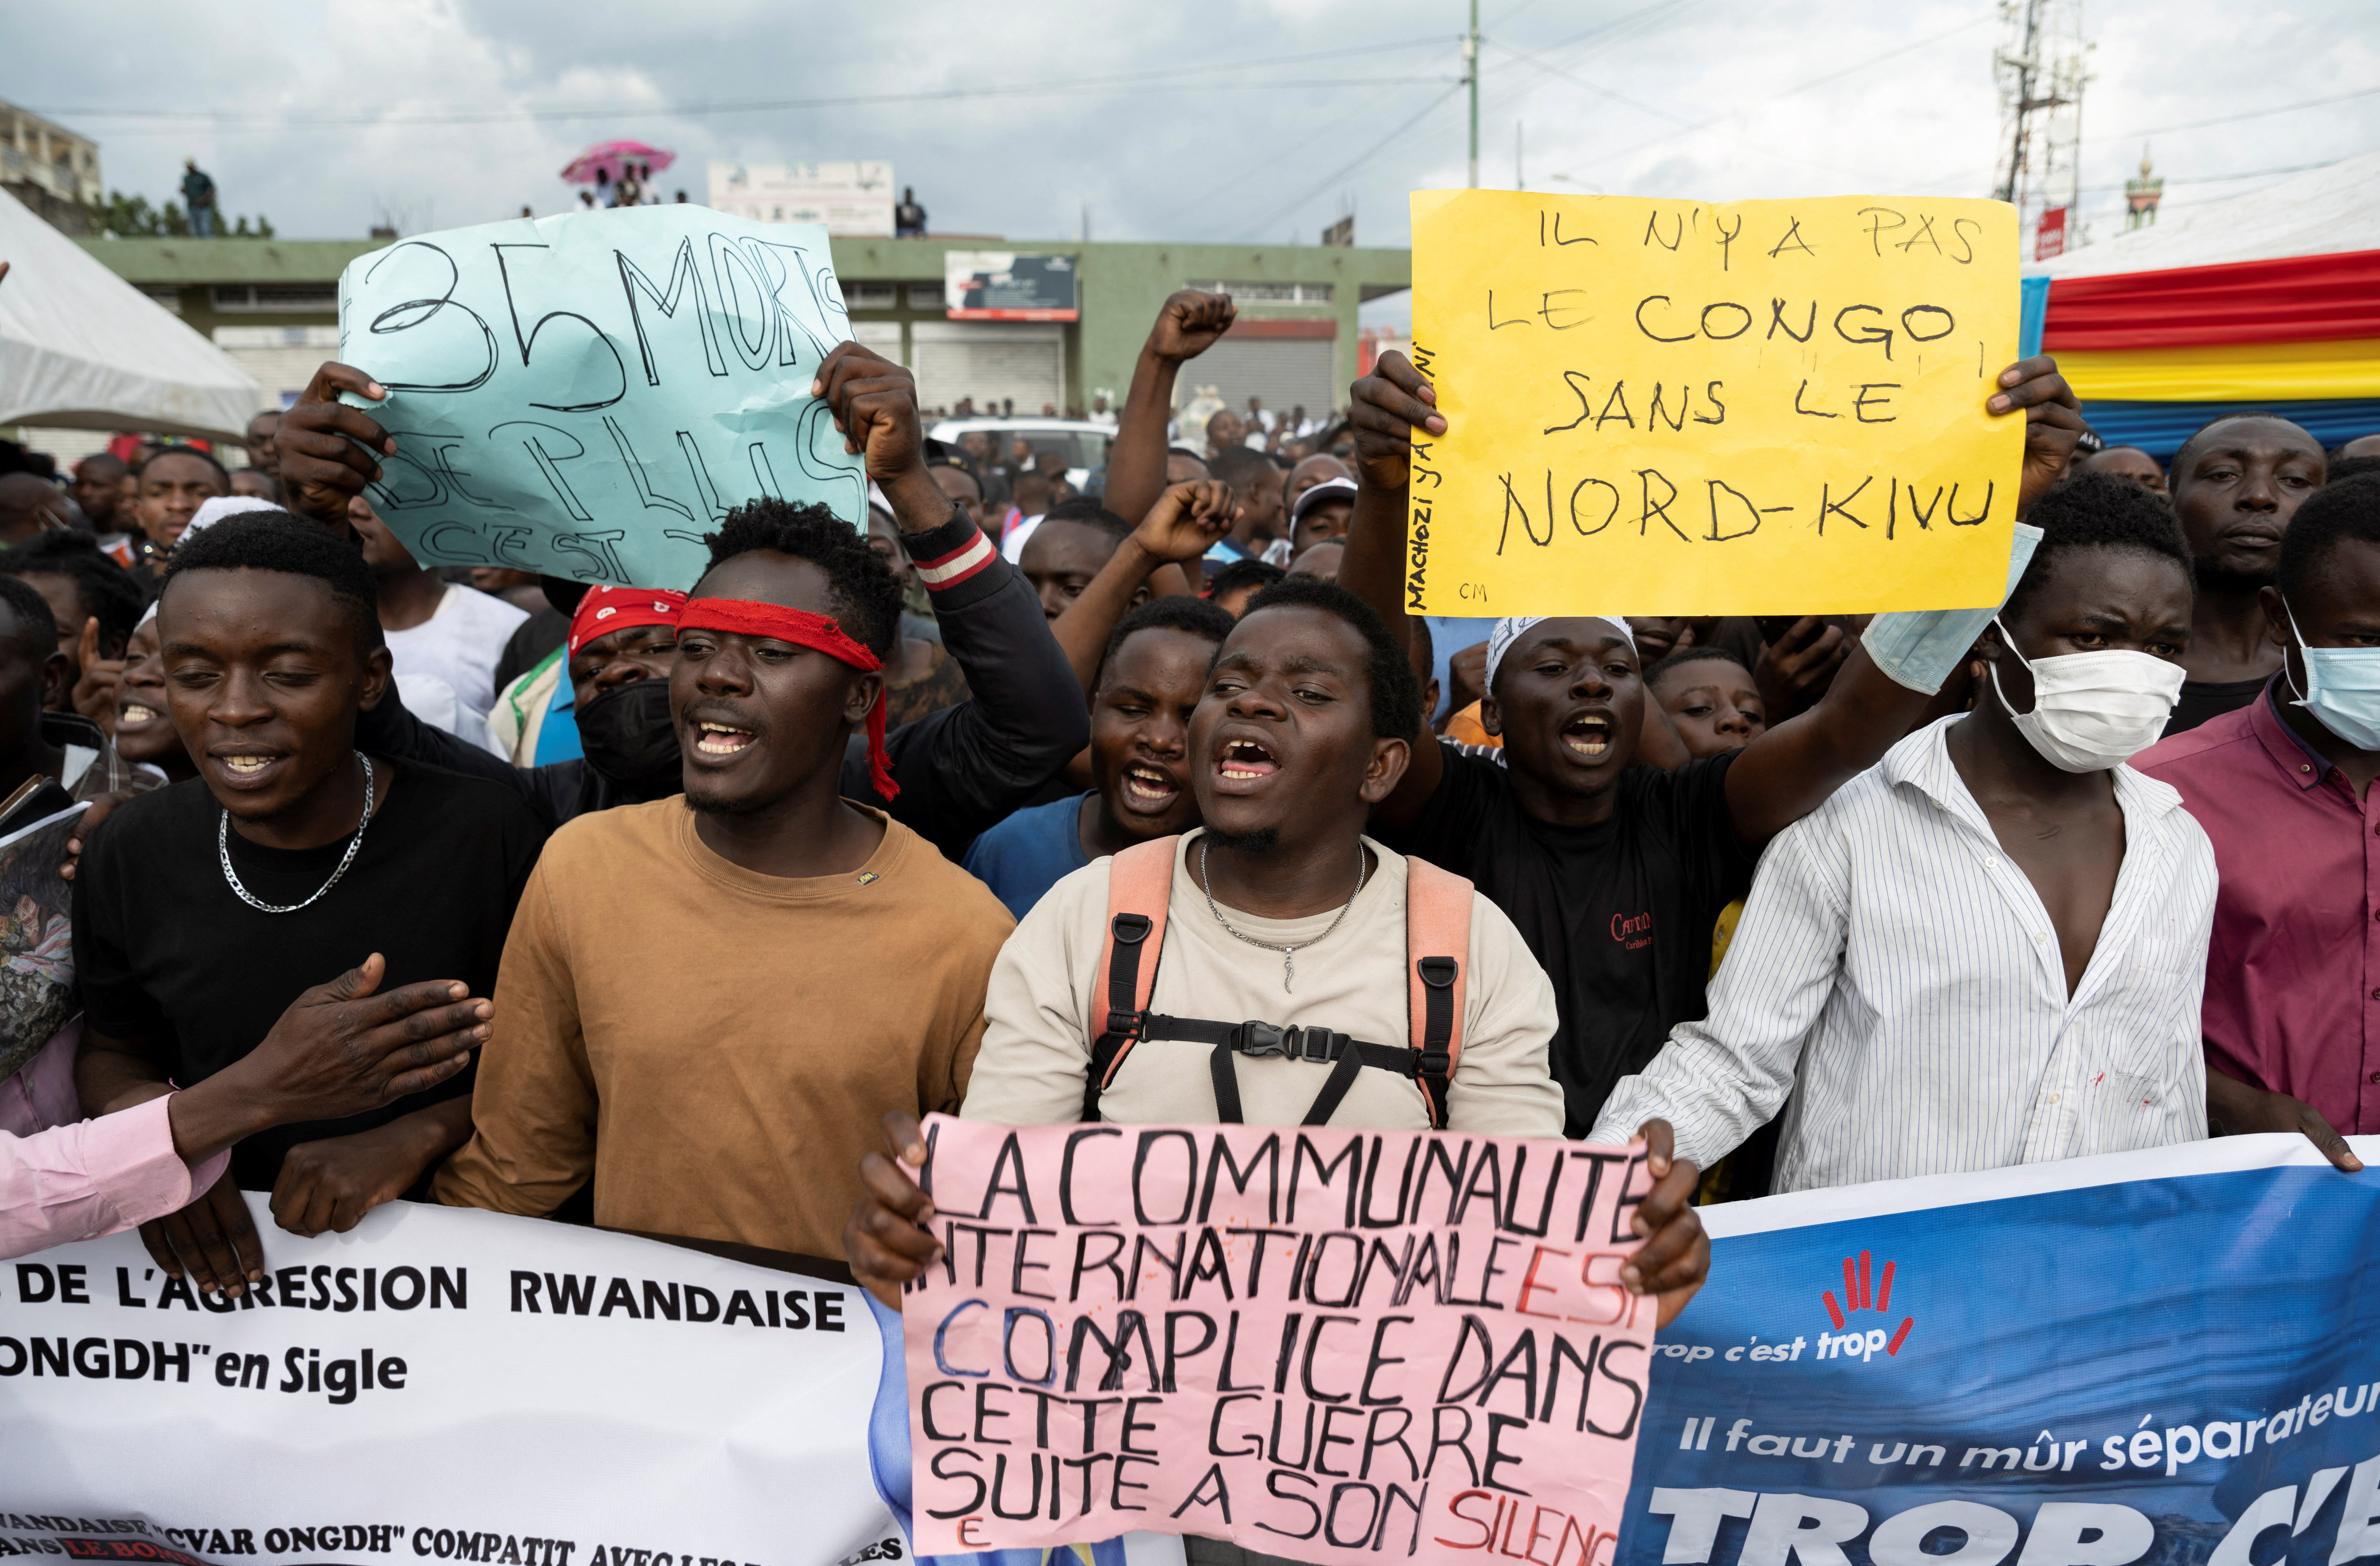 Funeral for refugees killed in strike on Congo displacement camp in Goma